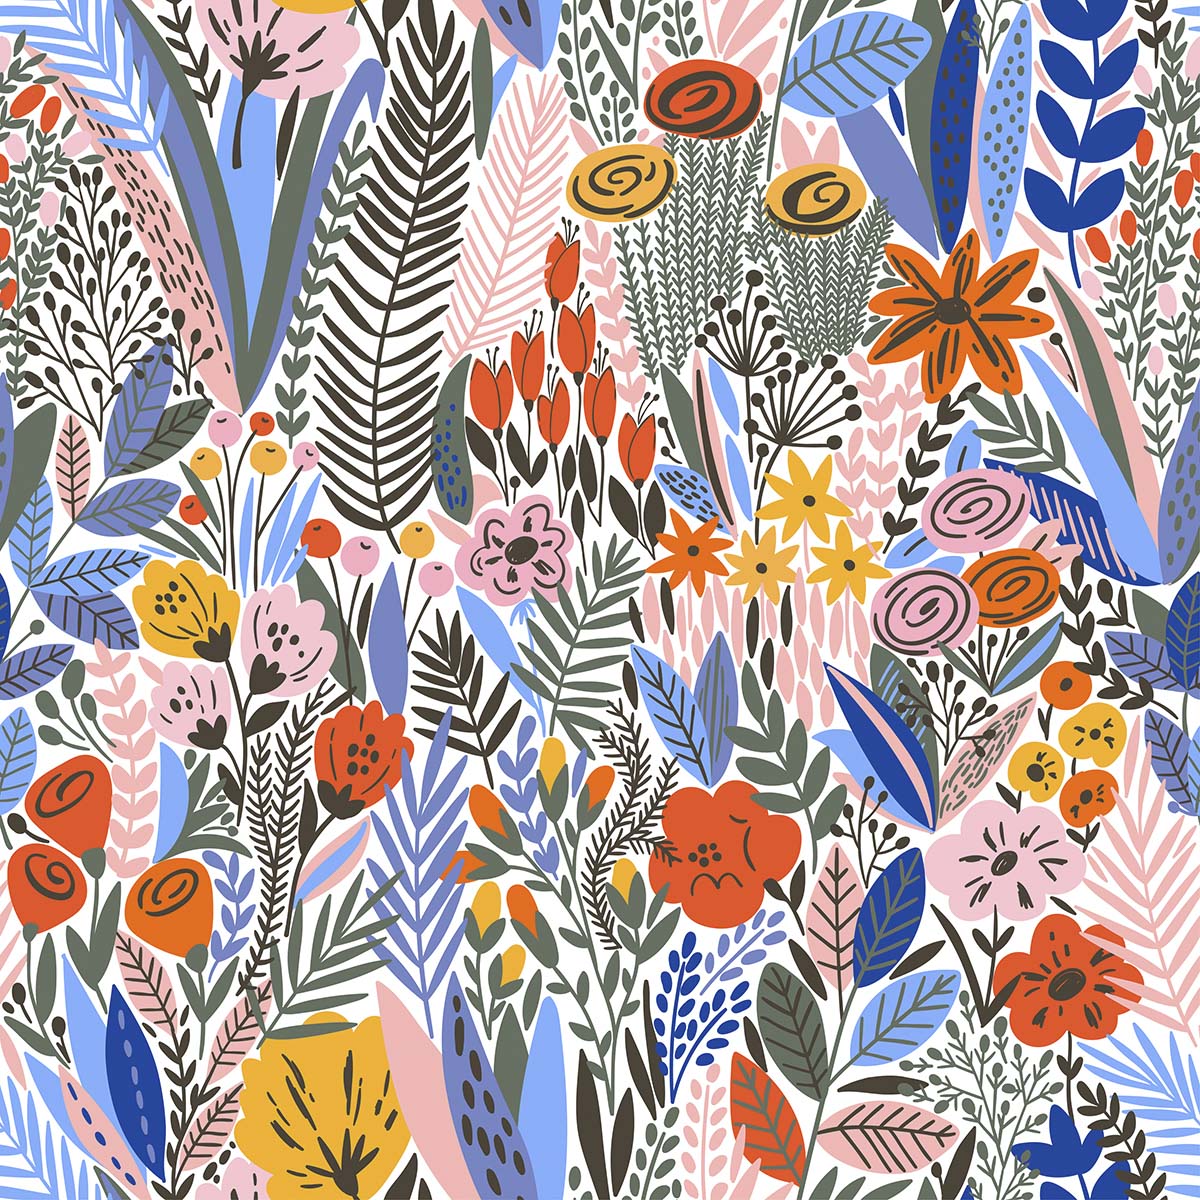 A colorful floral pattern with different flowers